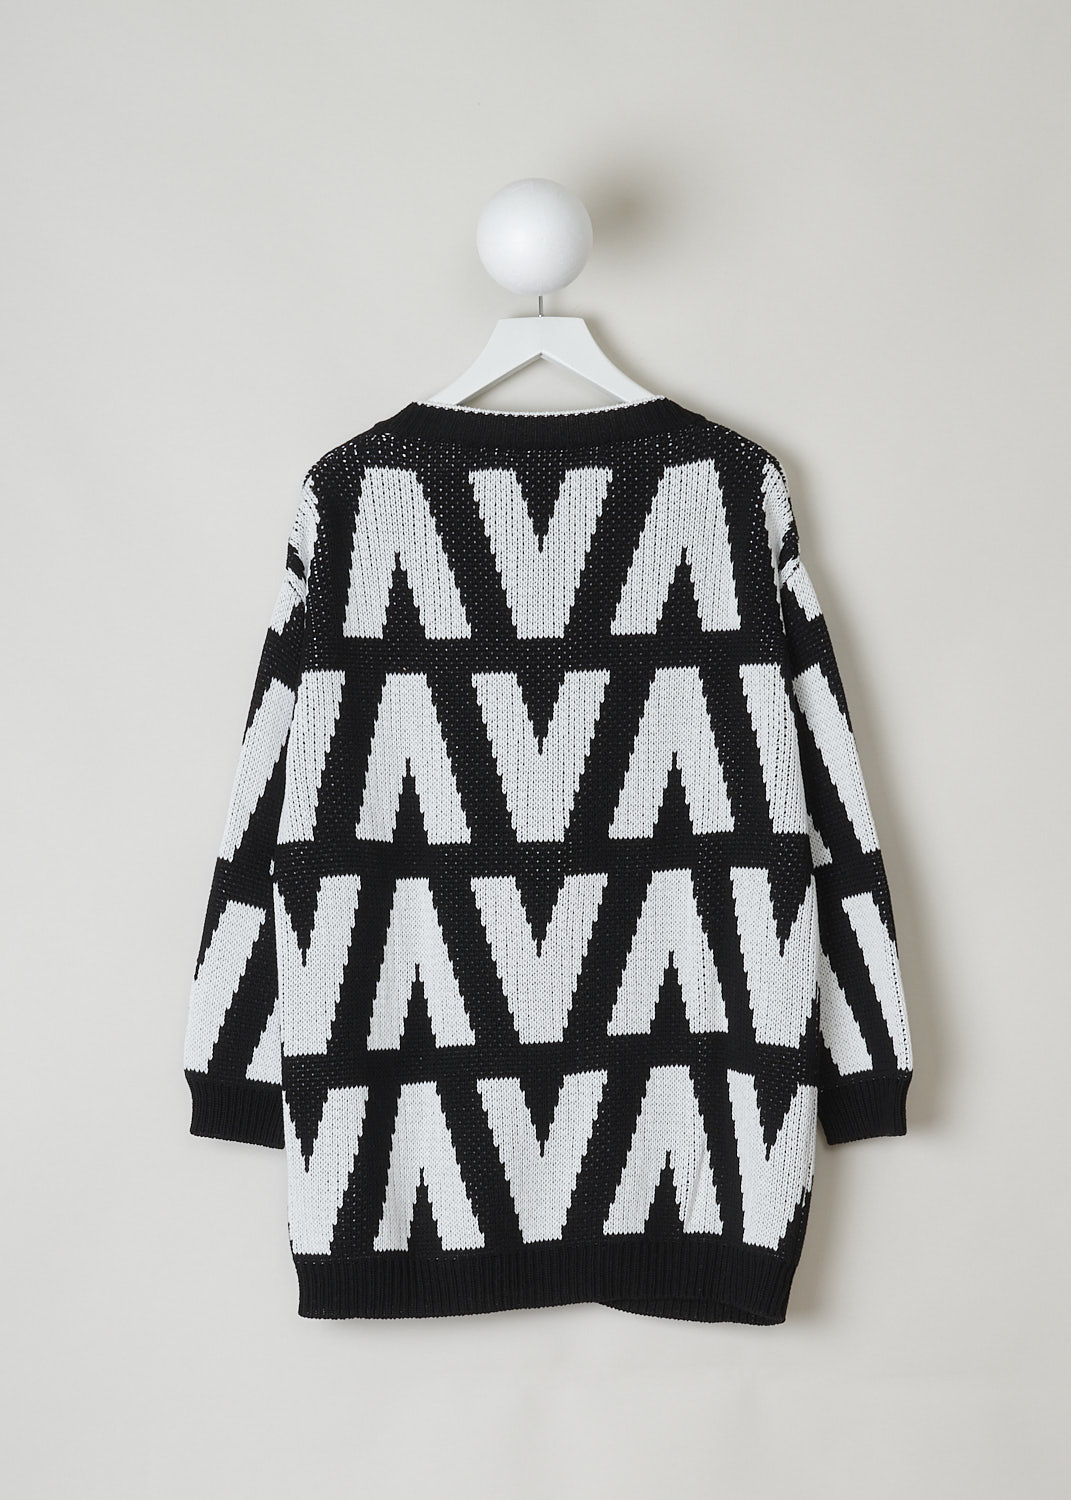 VALENTINO, BLACK AND WHITE CHUNKY KNIT CARDIGAN, WB3KA02I6G4_0NA, Black, White, Print, Back, This chunky knit cardigan has a black and white print with the brand's signature V incorporated in the motif. The cardigan has a ribbed V-neck. That same ribbed finish can be found along the front button closure, on the cuffs and on the hemline. Two patch pockets can be found on the front. The cardigan has an oversized silhouette. 
